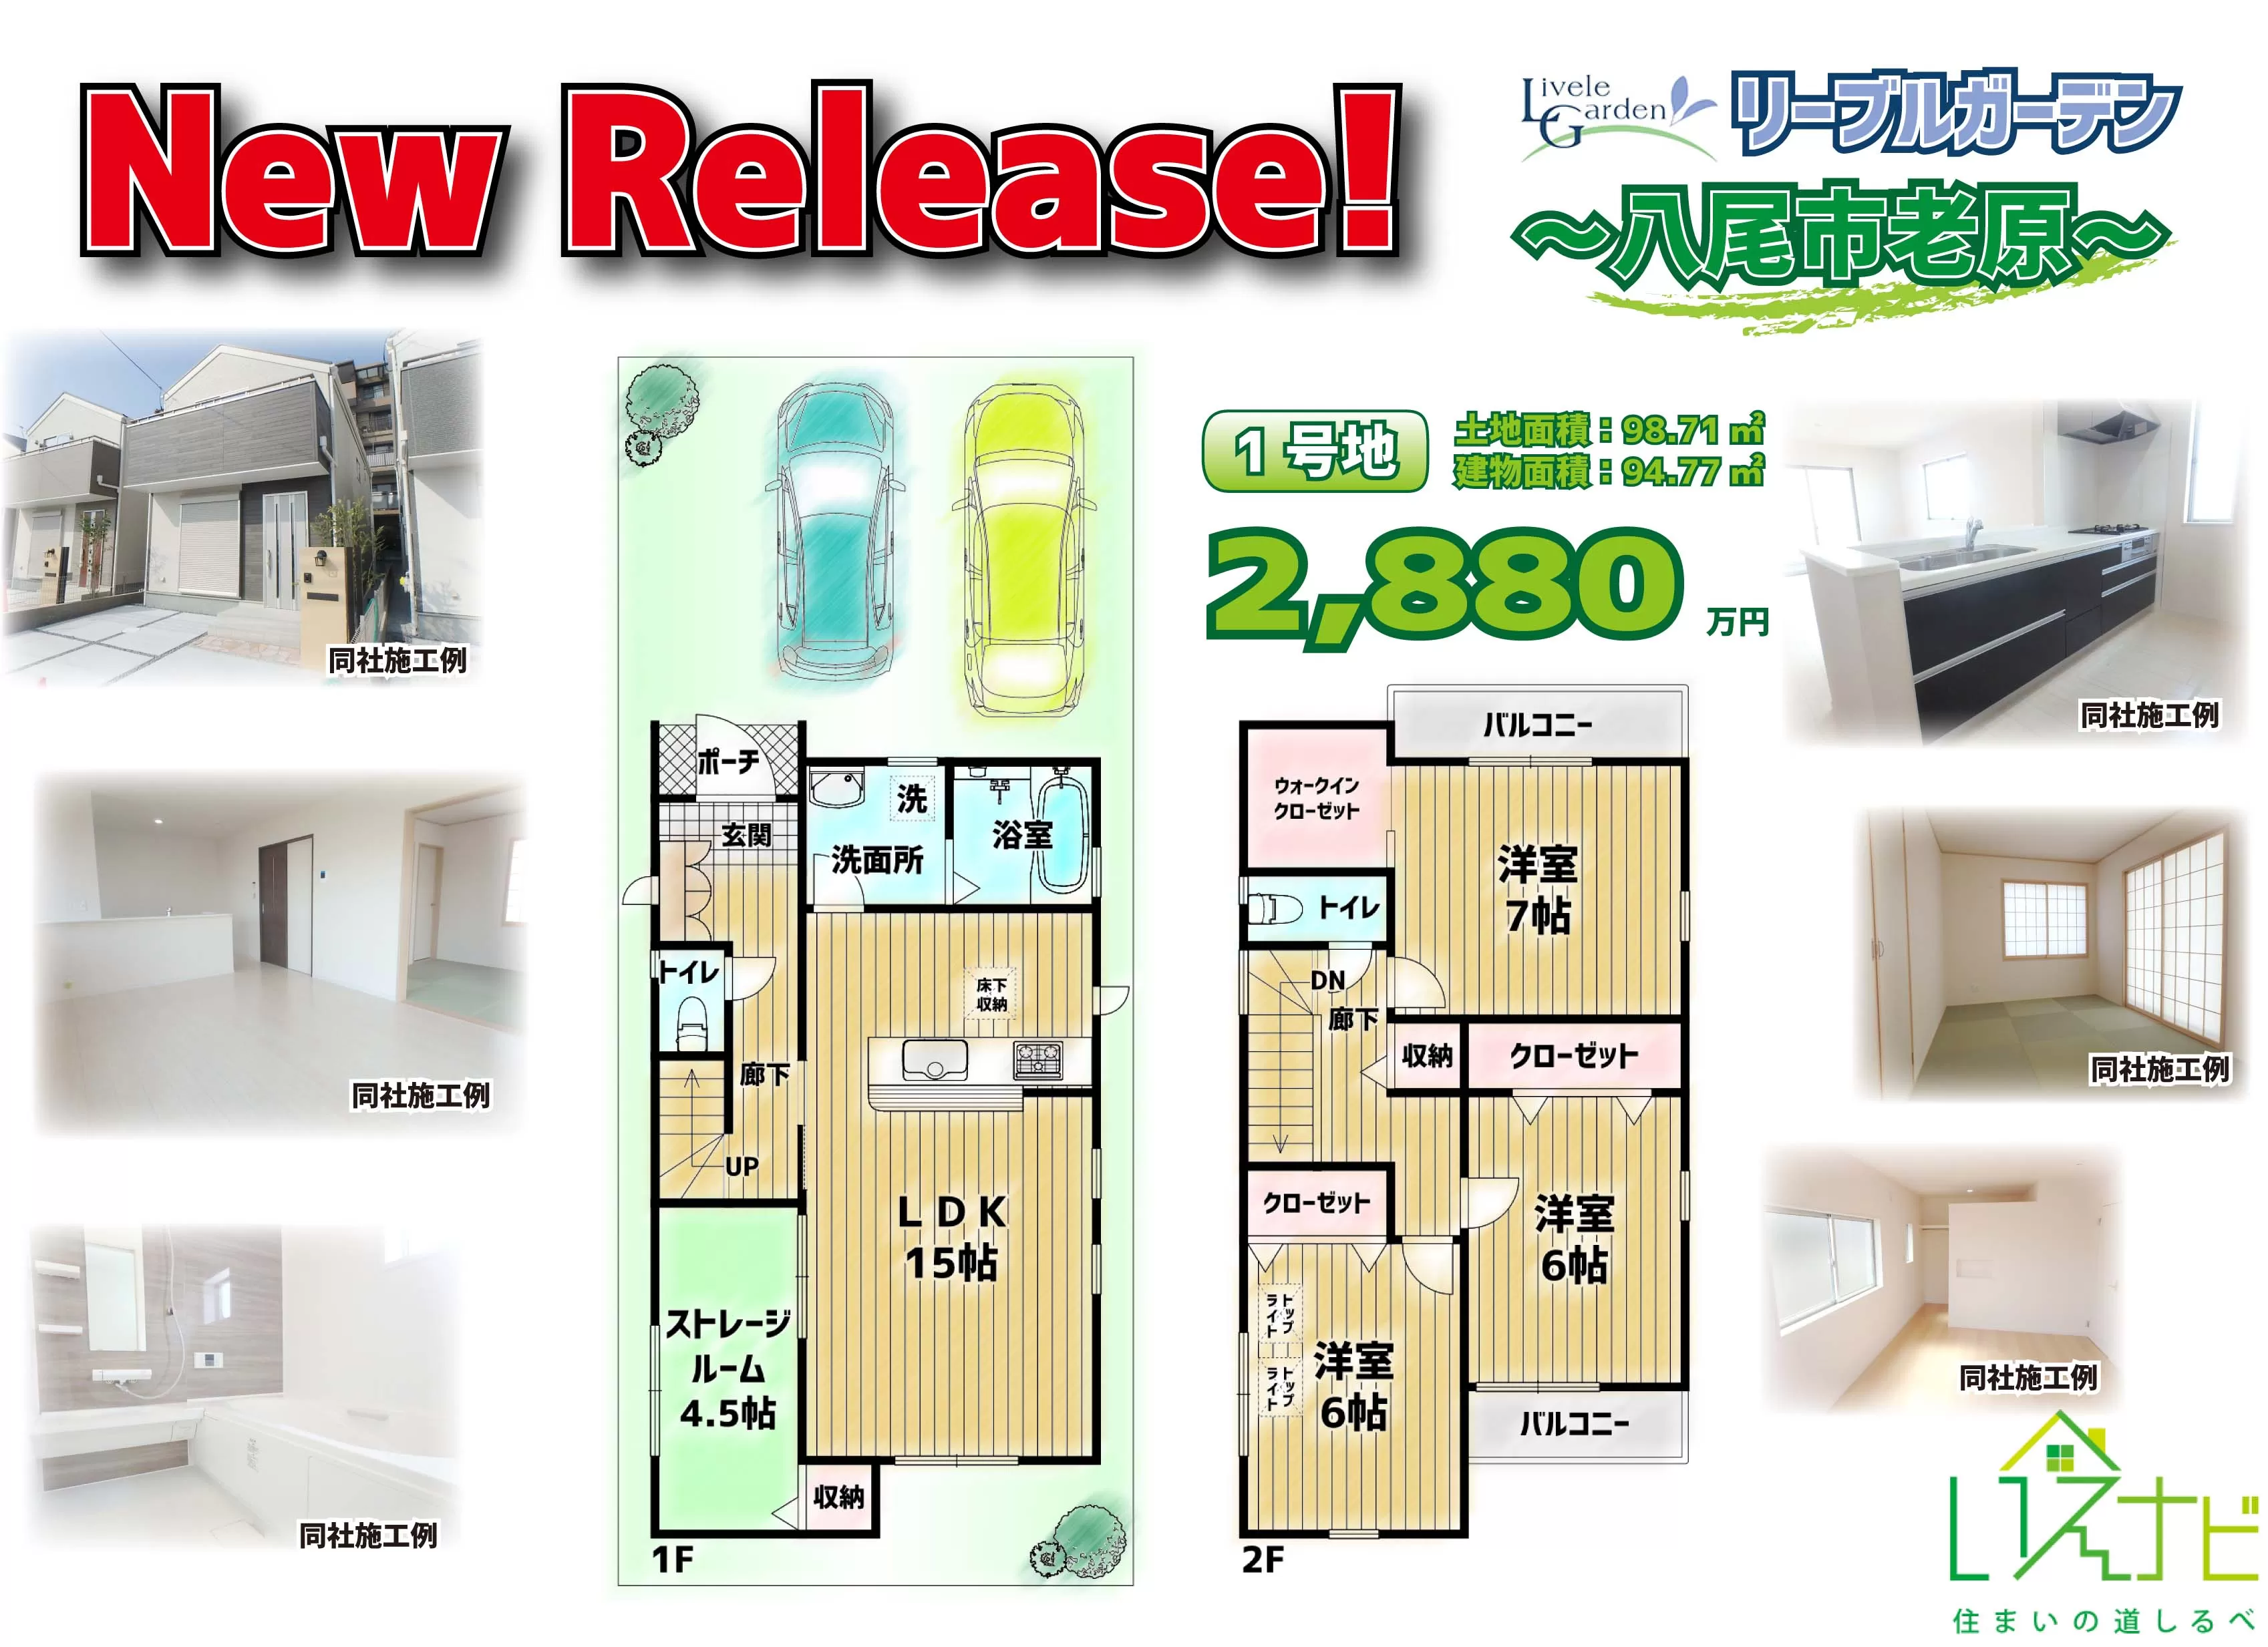 New Release ～リーブルガーデン八尾市老原～